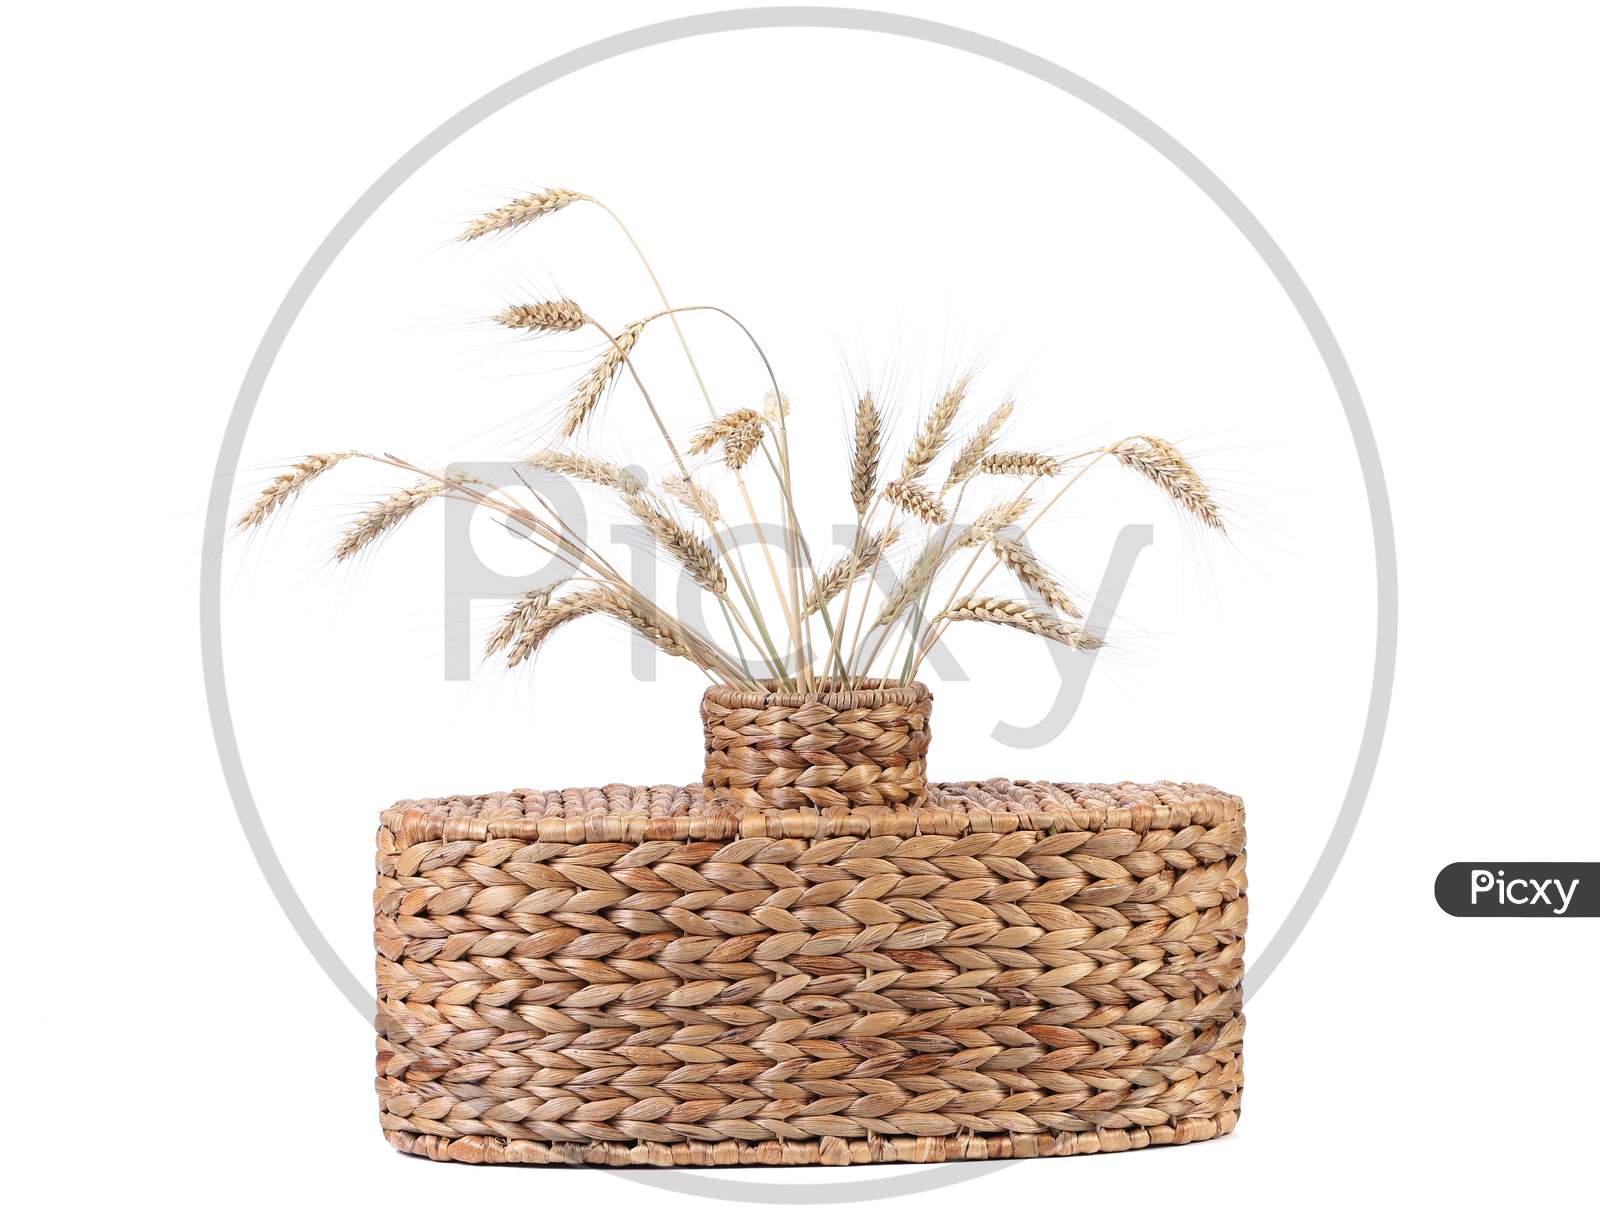 Wicker Vase With Wheat Ears. Isolated On A White Background.